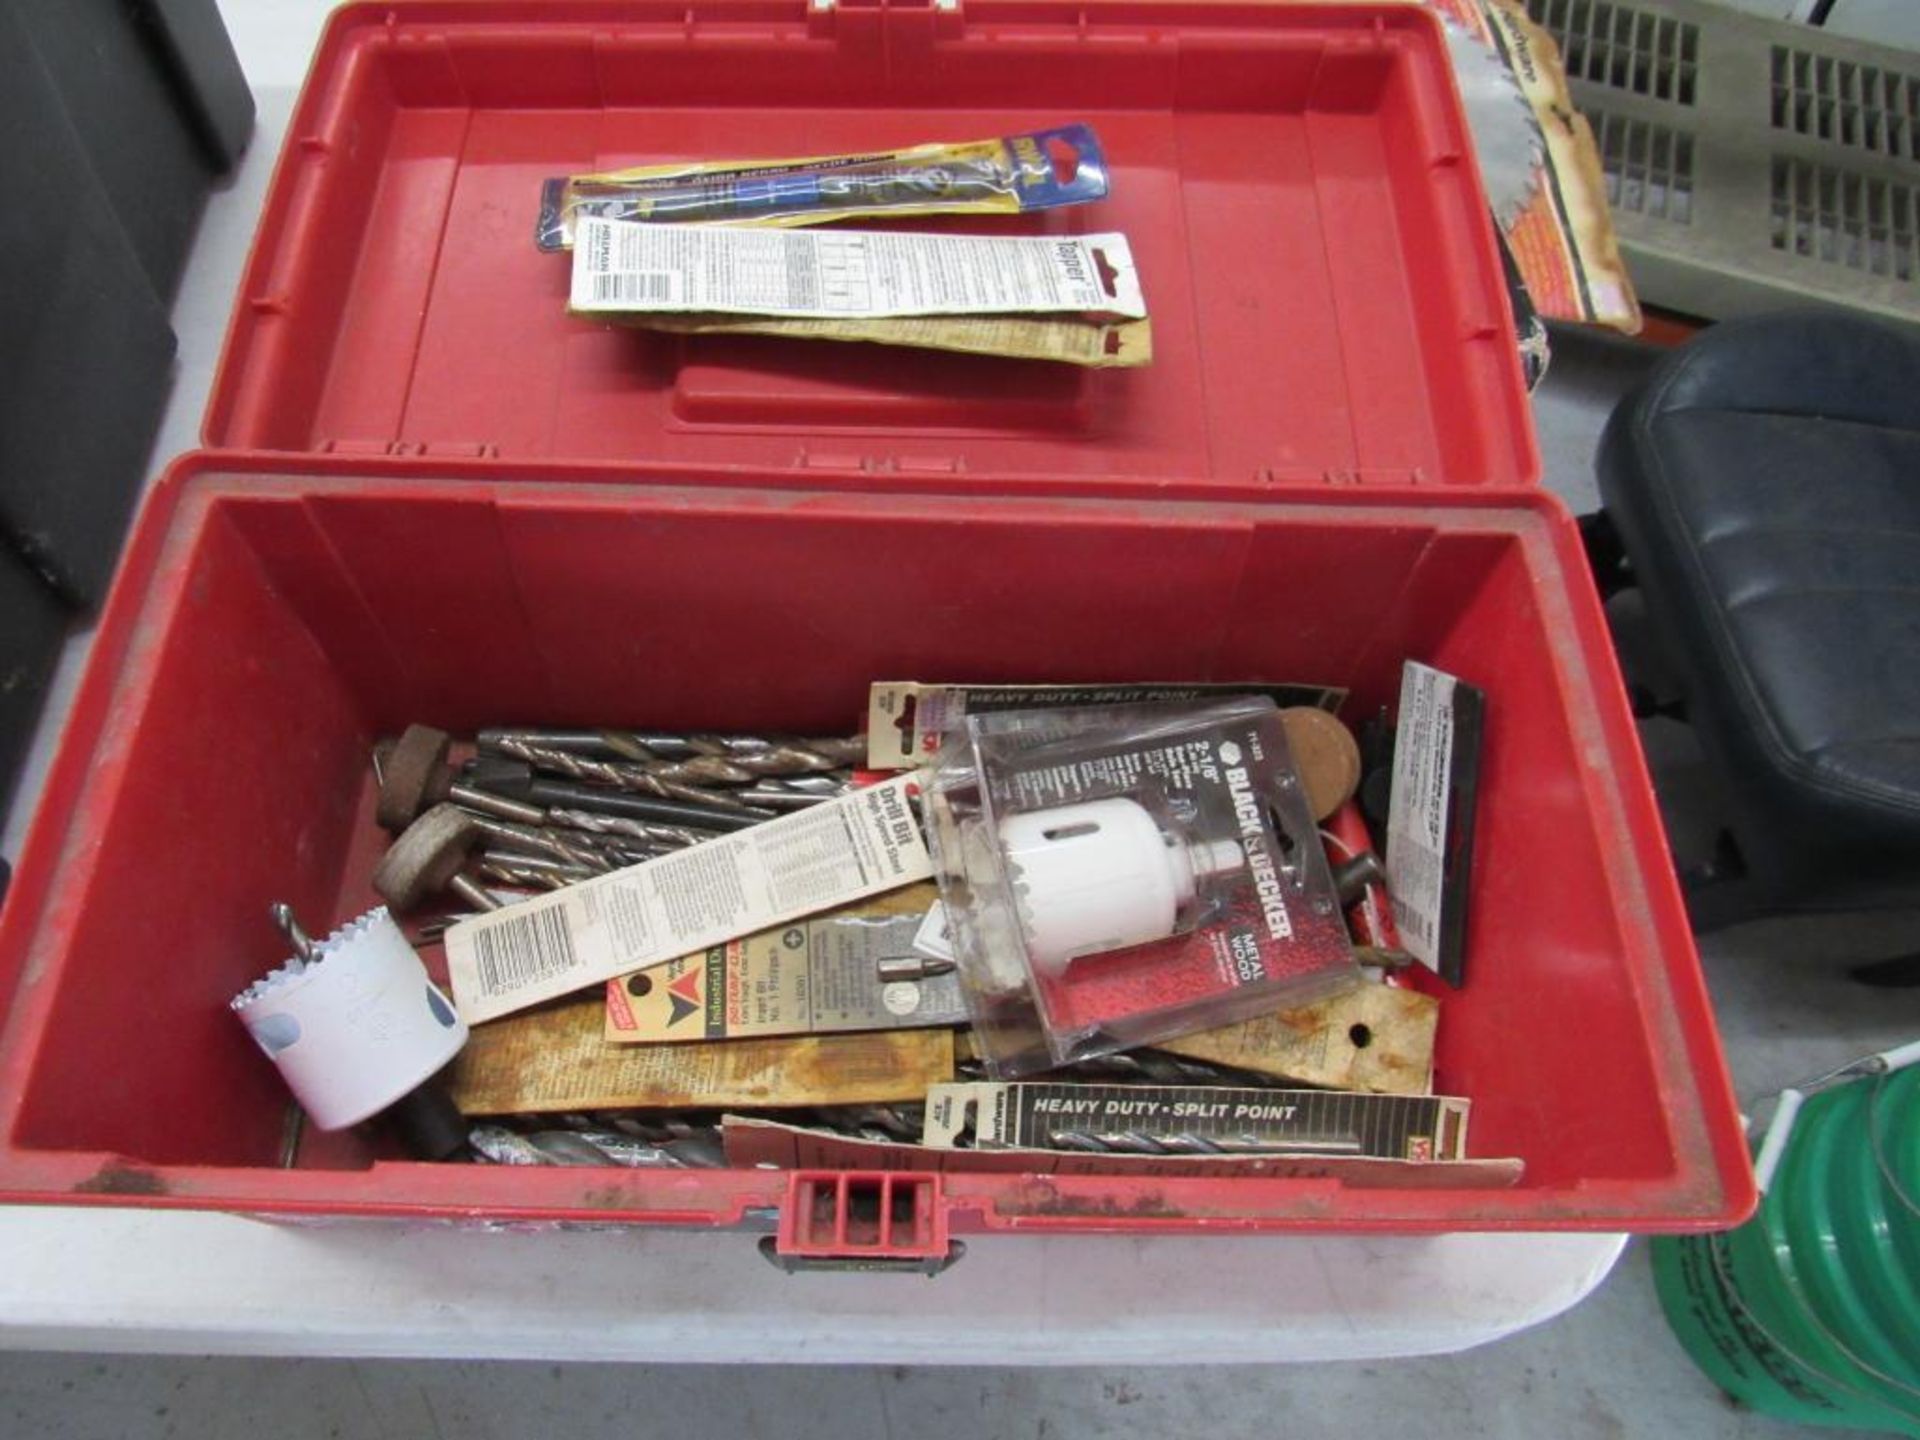 LOT: Assortment of Wrenches, Screw Drivers, Chanel Locks, Scrapers, Files, Brushes, Box Cutters - Image 6 of 7